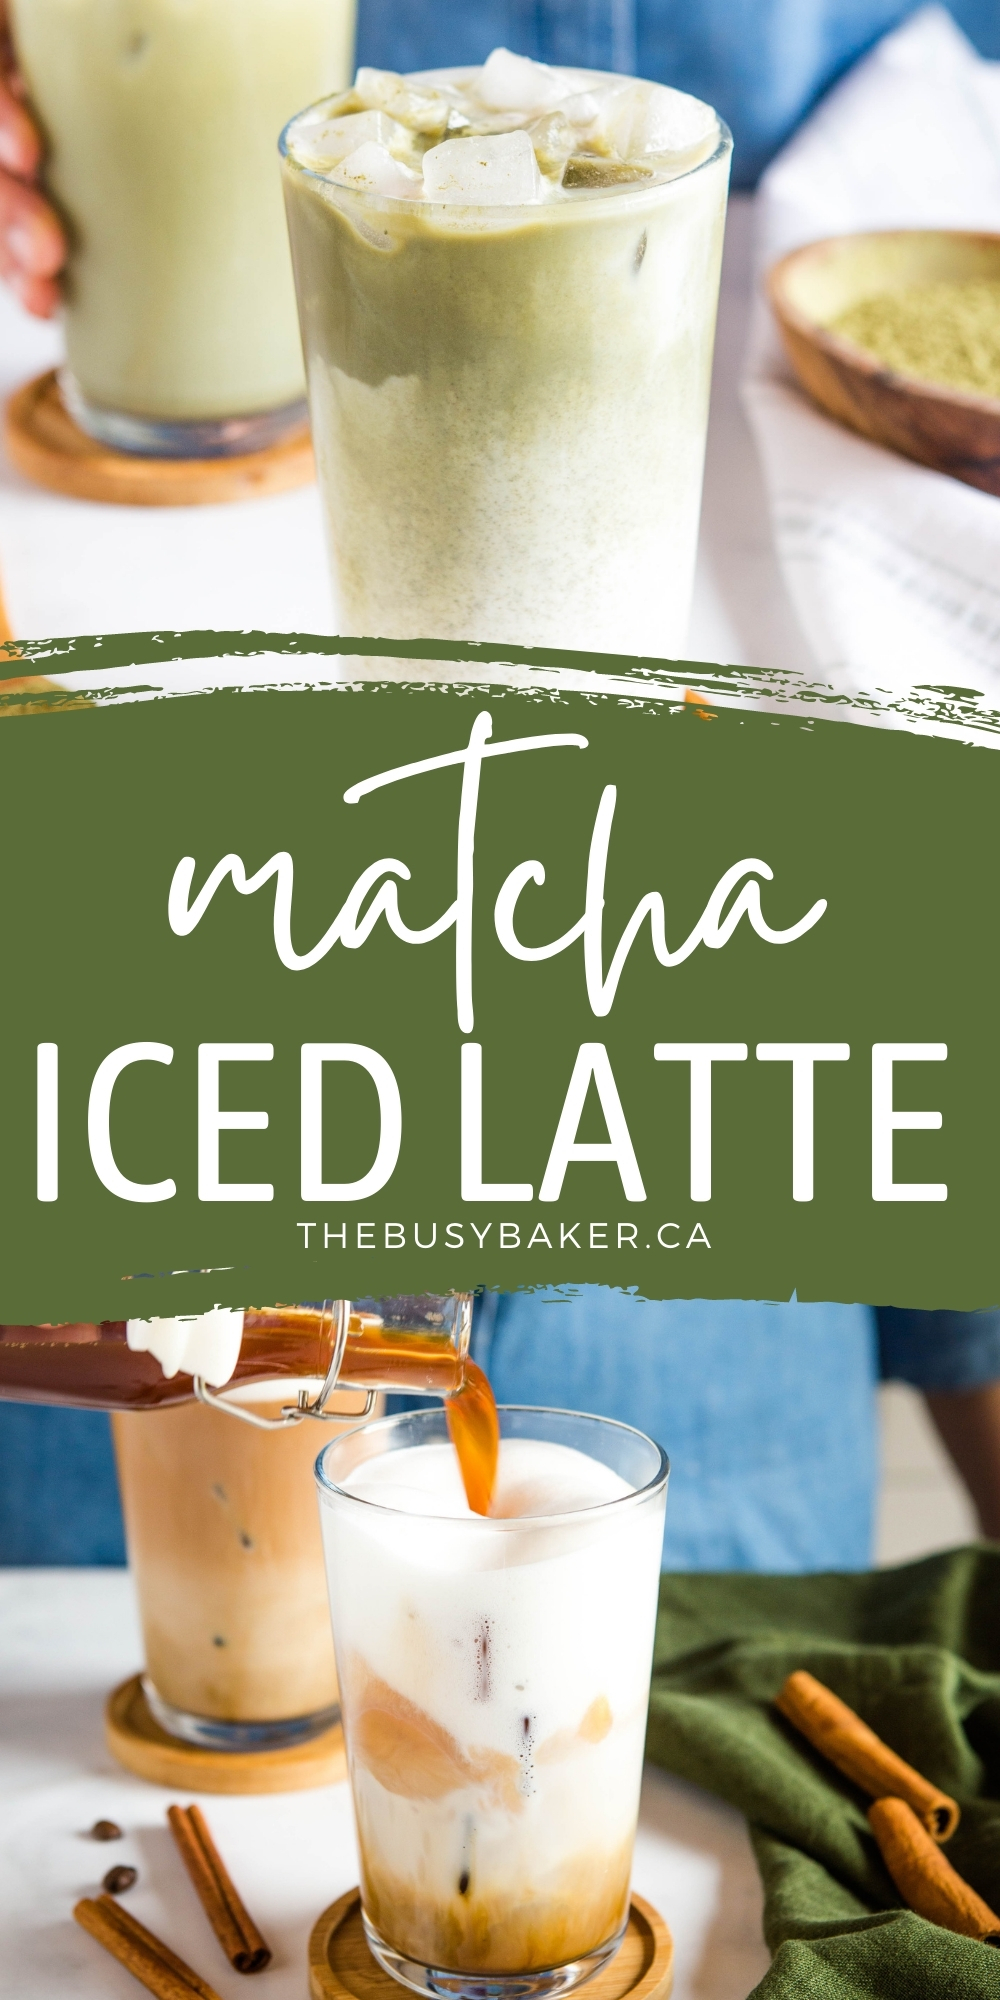 This Iced Matcha Latte is the perfect refreshing tea latte. Matcha green tea, foamed milk & maple syrup - easy to make & delicious! Recipe from thebusybaker.ca ! #matcha #icedlatte #matchalatte #icedmatcha #matchalatteiced #starbucks #copycat #drink #coffeeshop #coffee via @busybakerblog